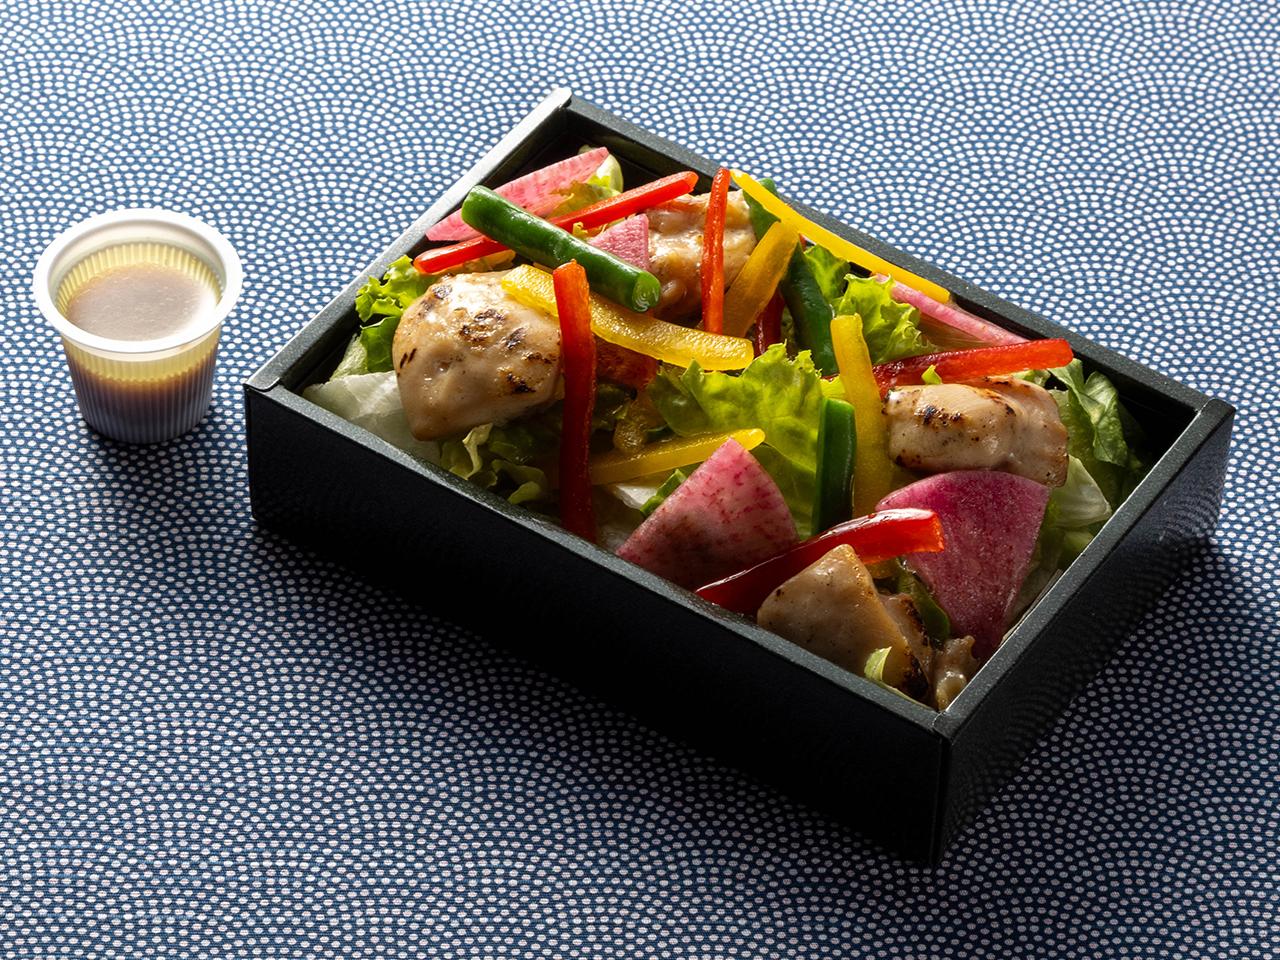 Photograph of in-flight meal Grilled chicken salad with balsamic dressing